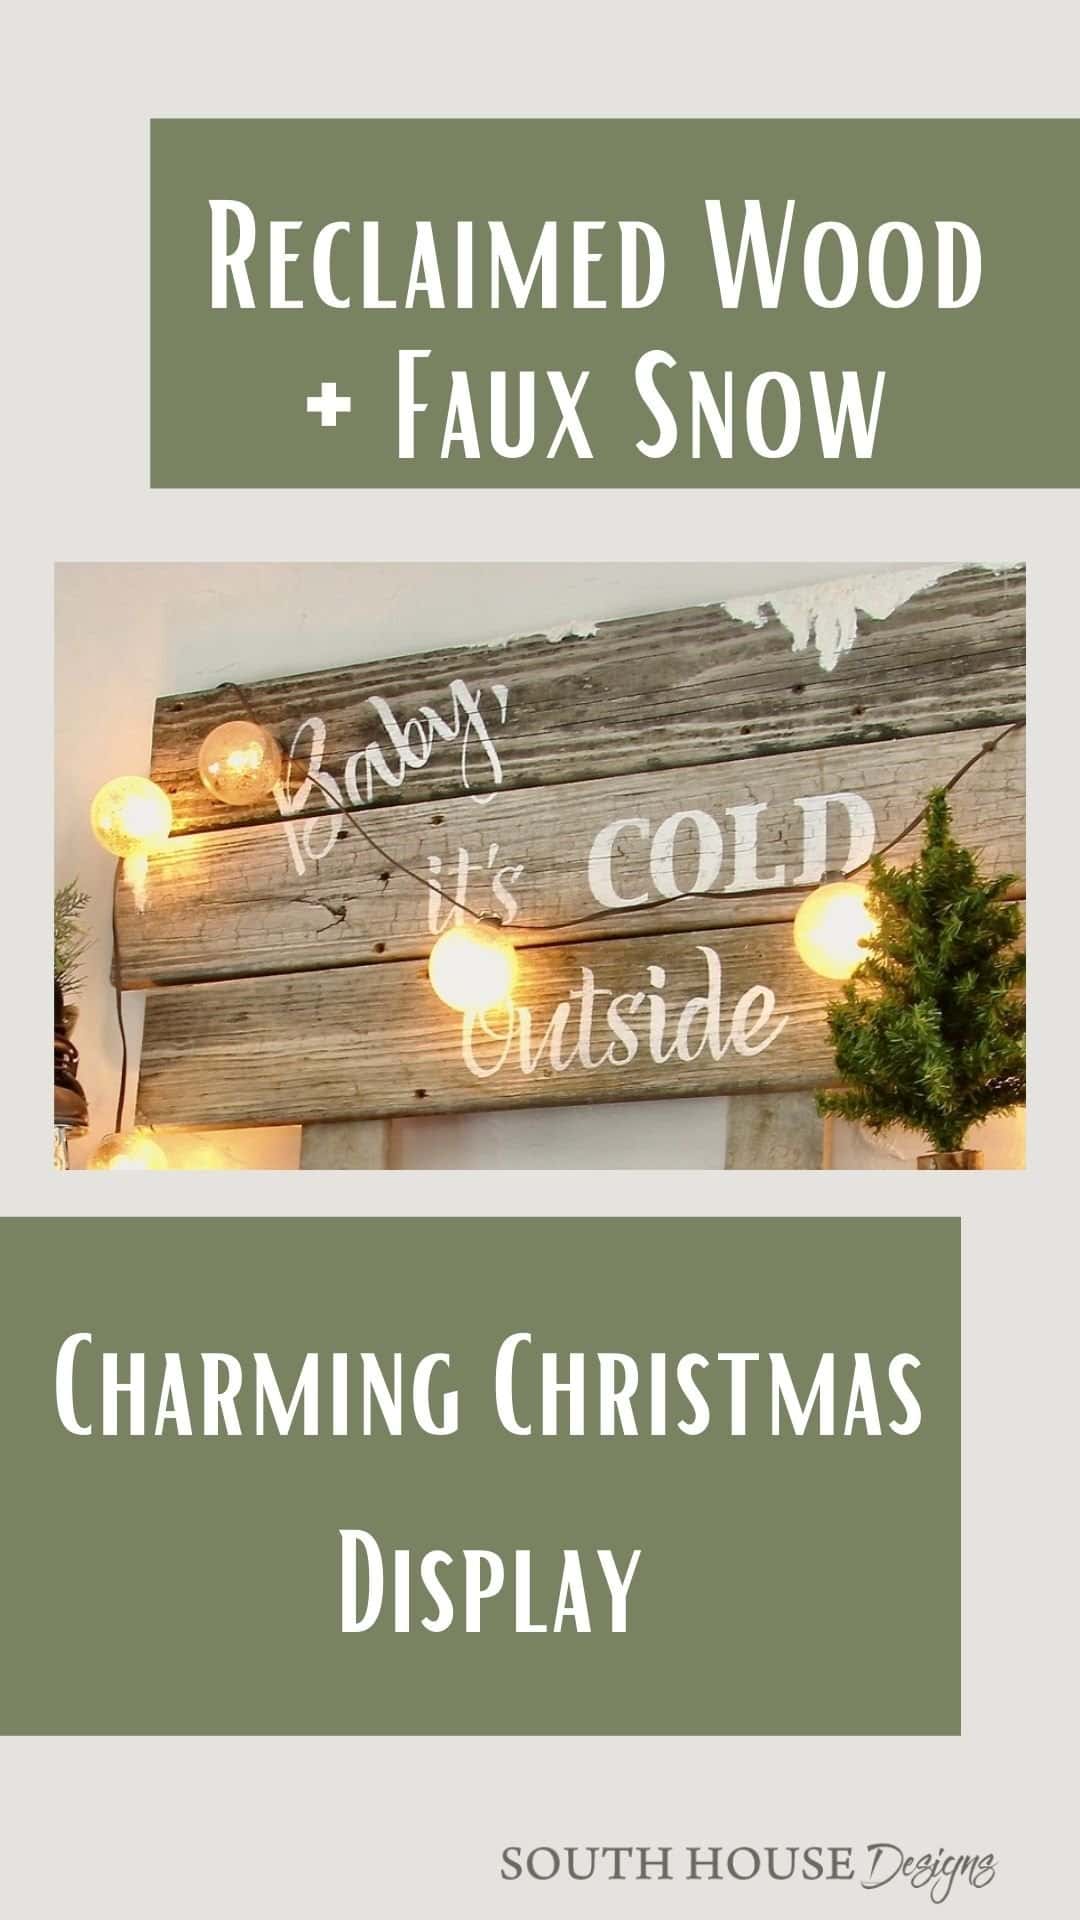 Pin with image of the sign on a wood mantel with title reading "Reclaimed Wood + Faux Sow = Charming Christmas Display"